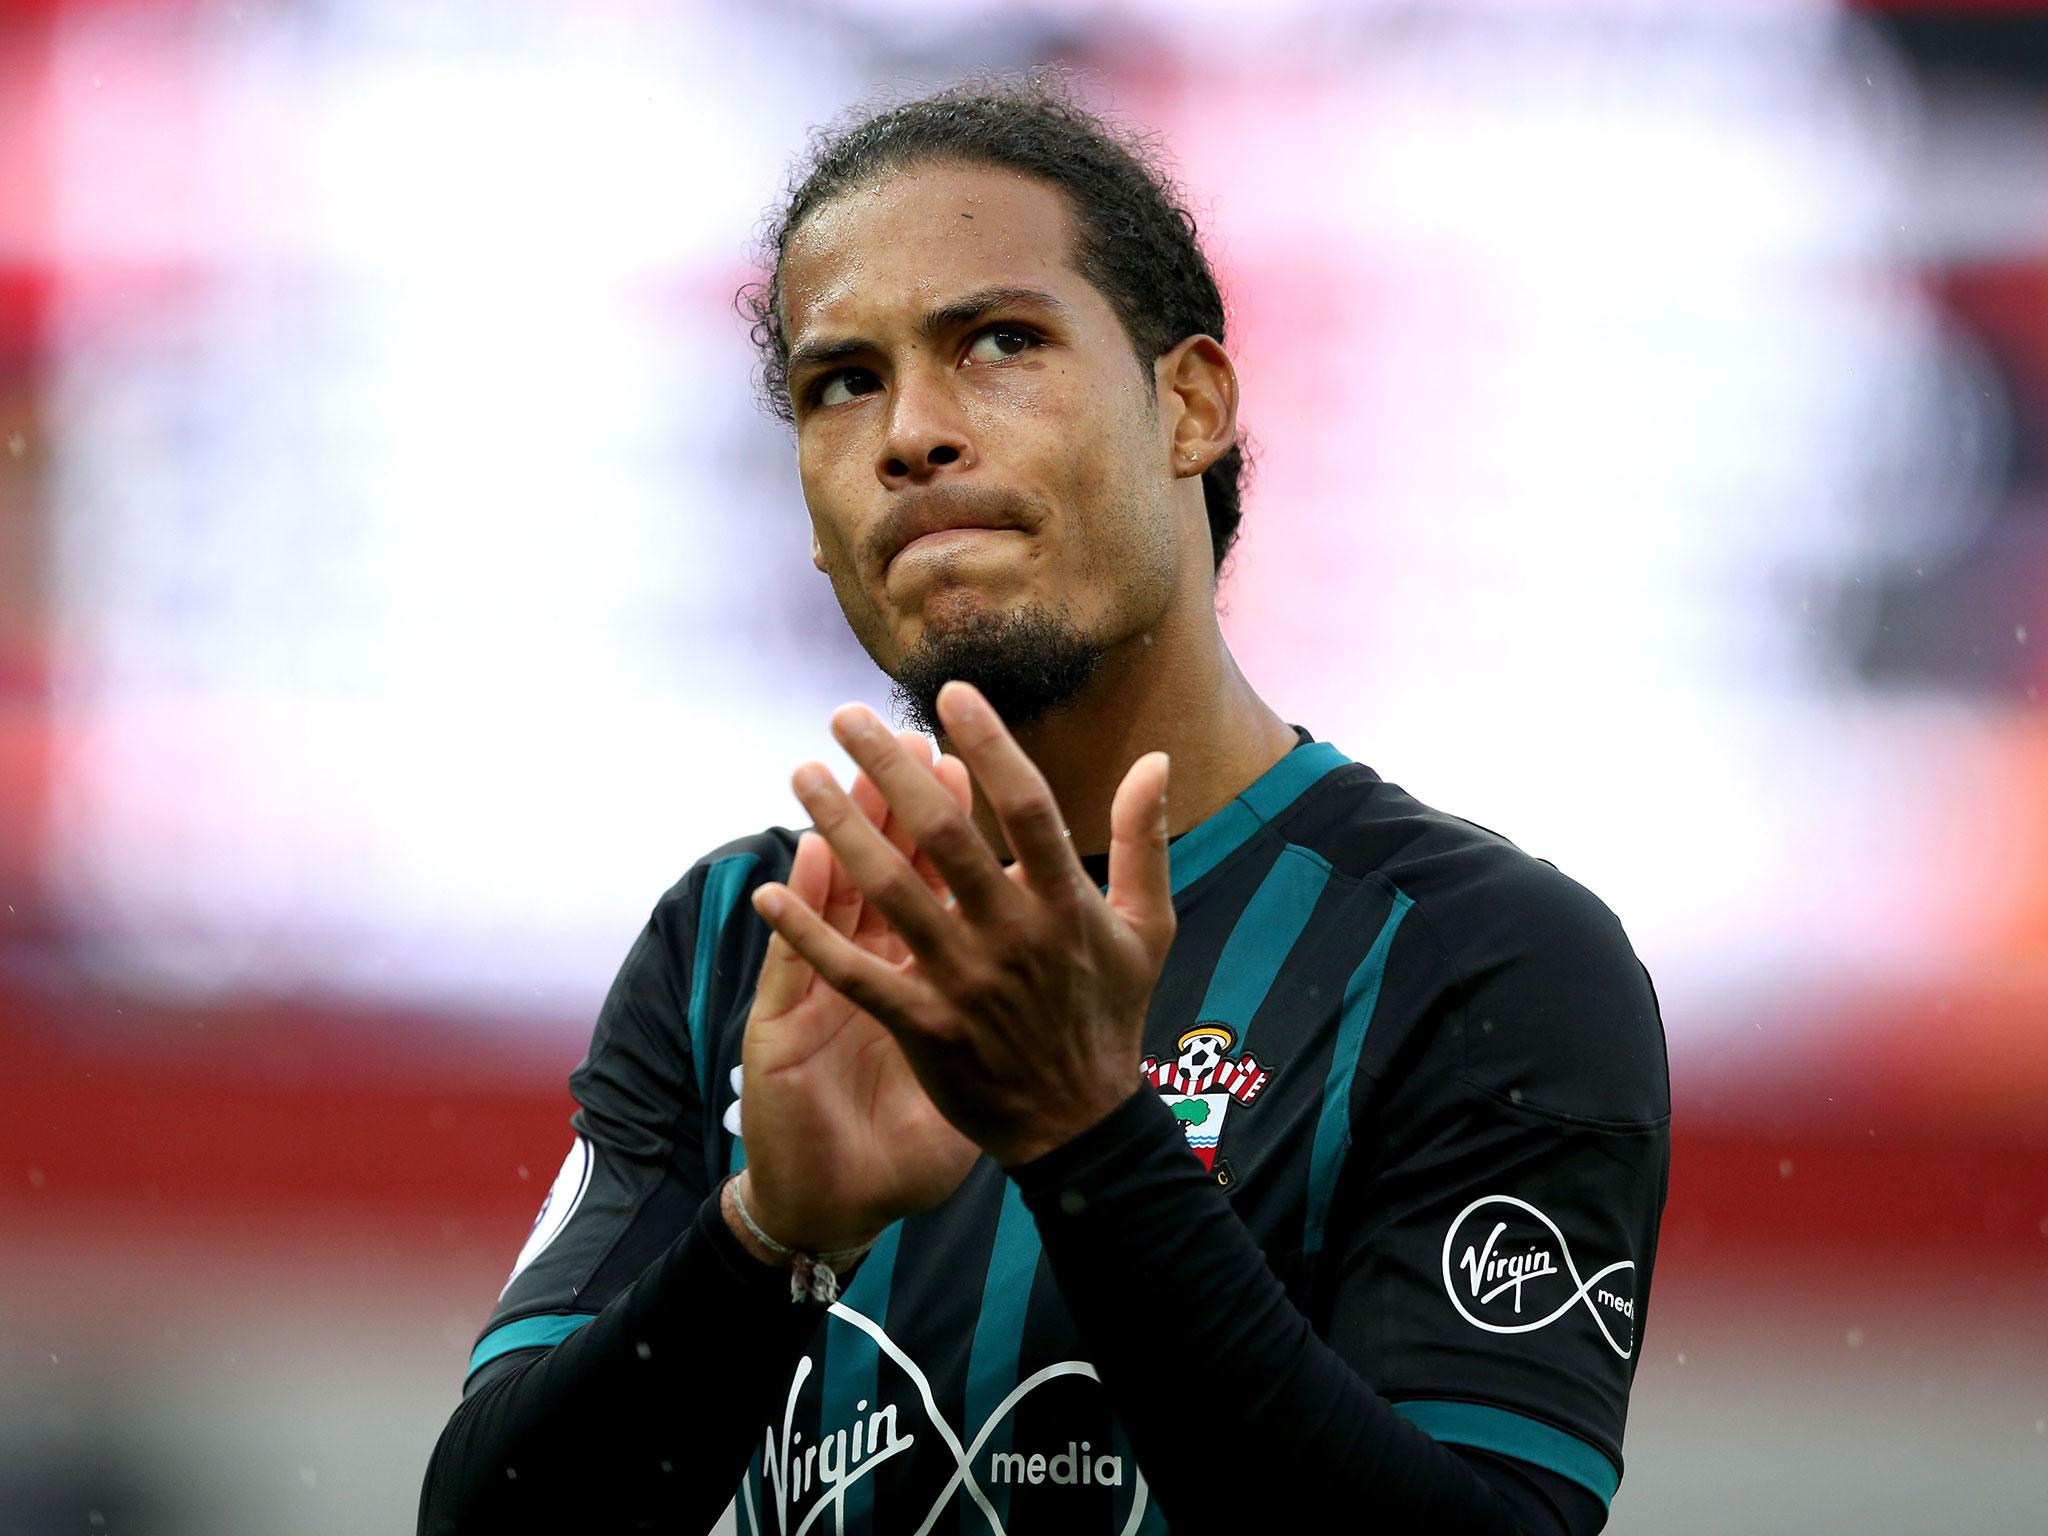 Southampton are set to re-invest the £75m they received for Virgil van Dijk